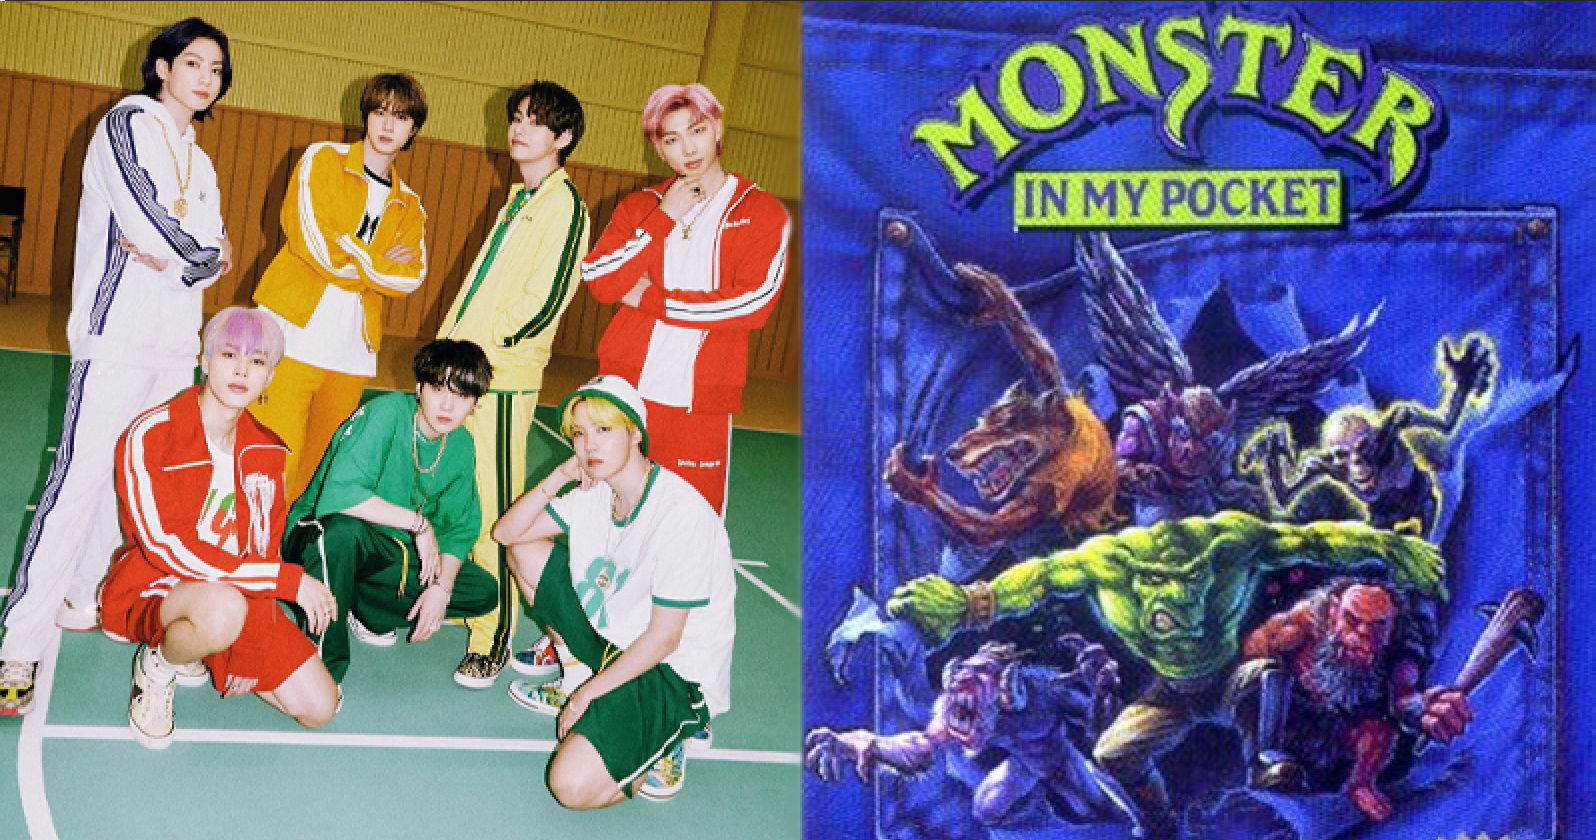 Netizens are saying that BTS's "Butter" melody sounds similar to a Nintendo game released in 1992